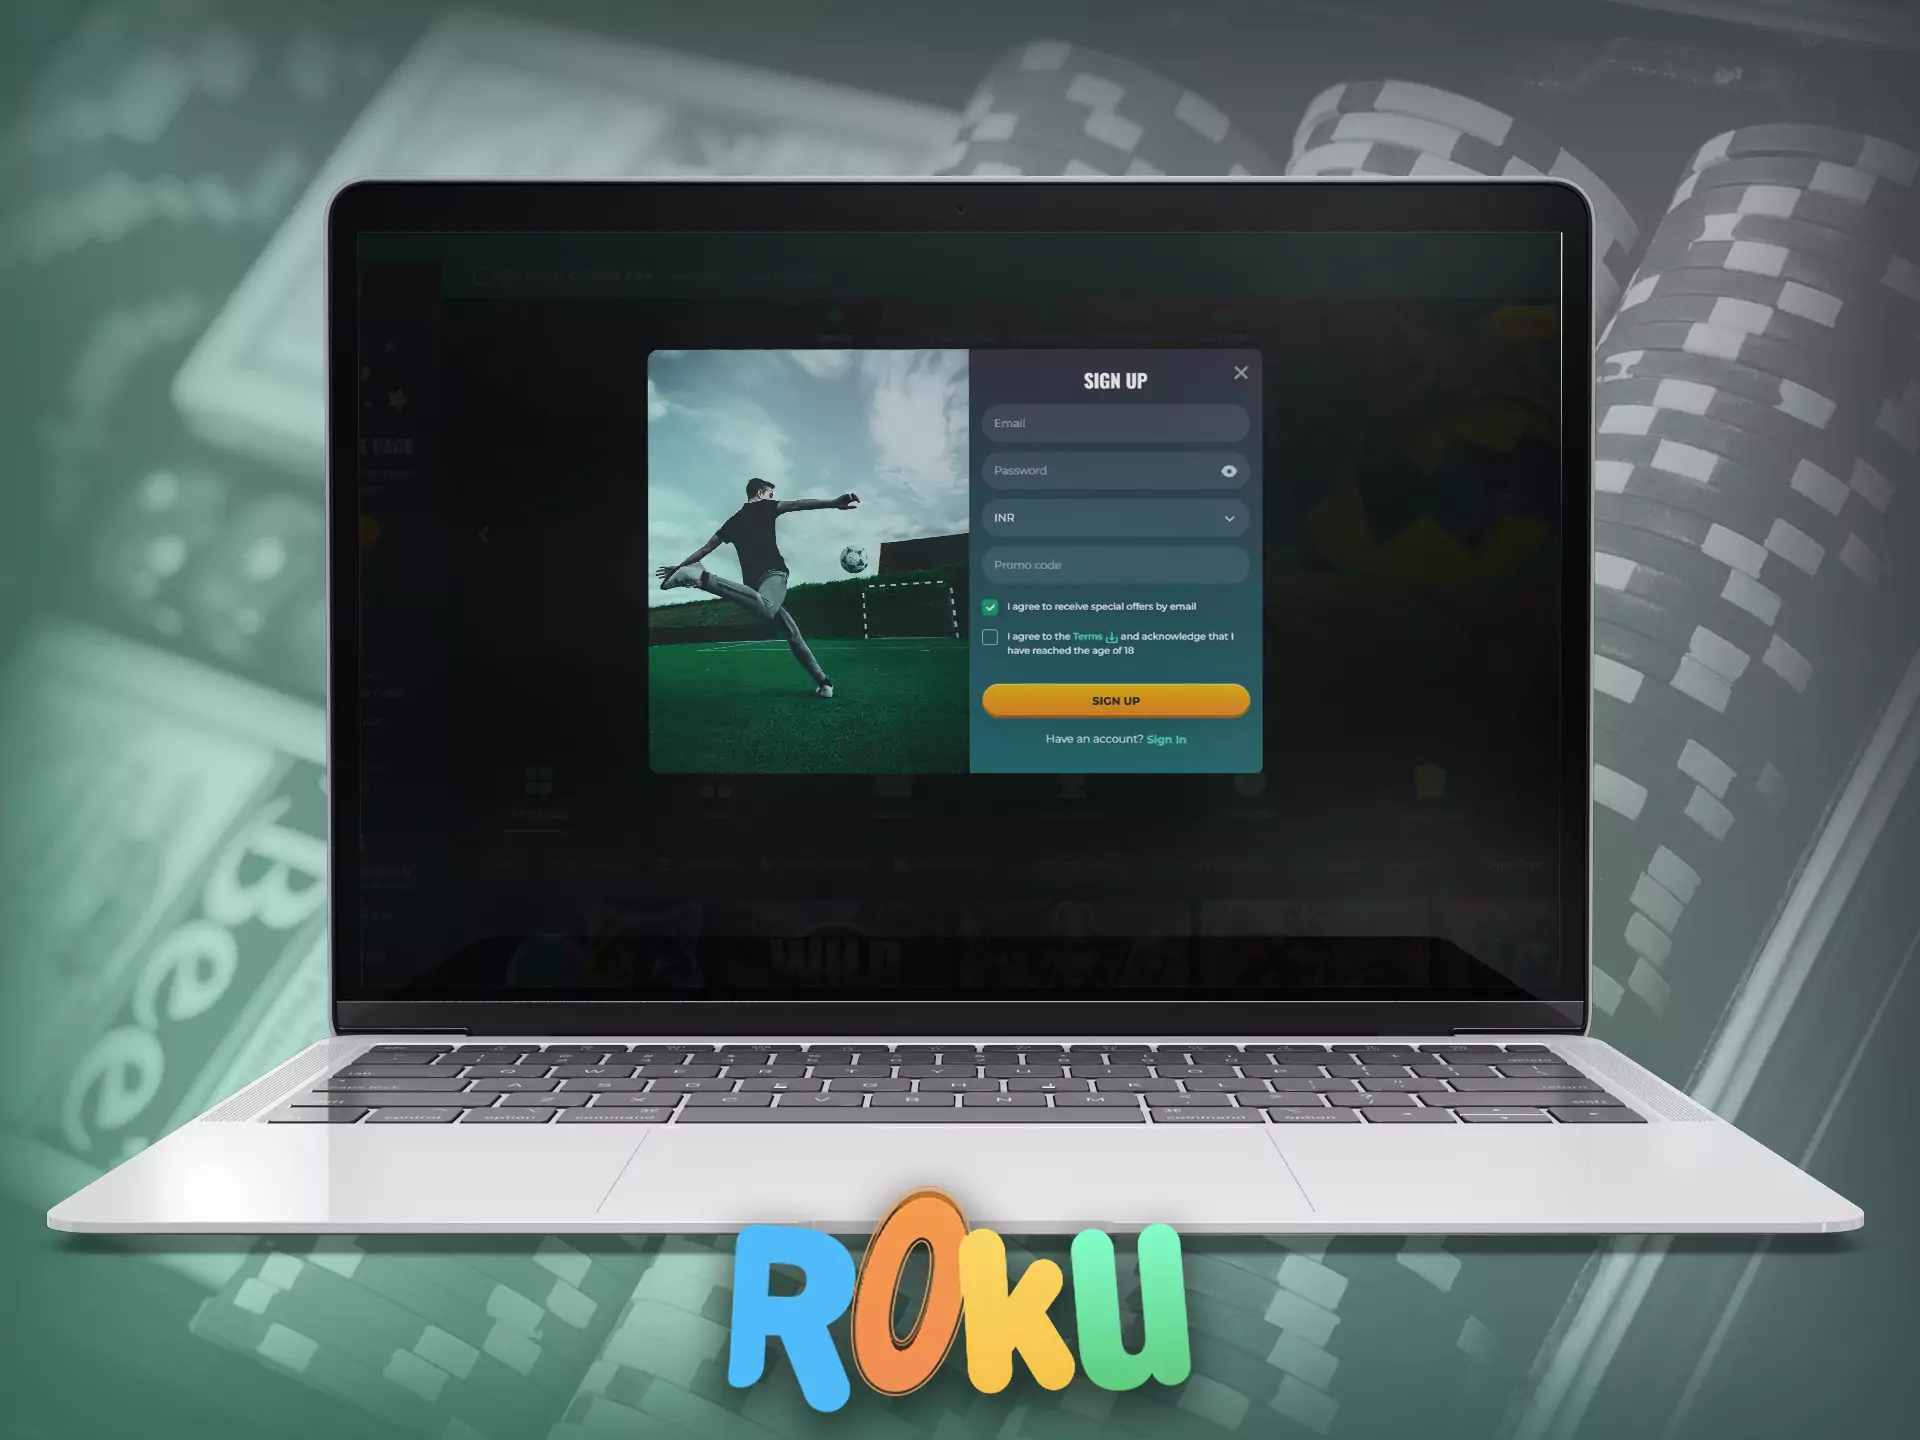 Only real users can bet and play on Rokubet, so provide your actual data during registration.